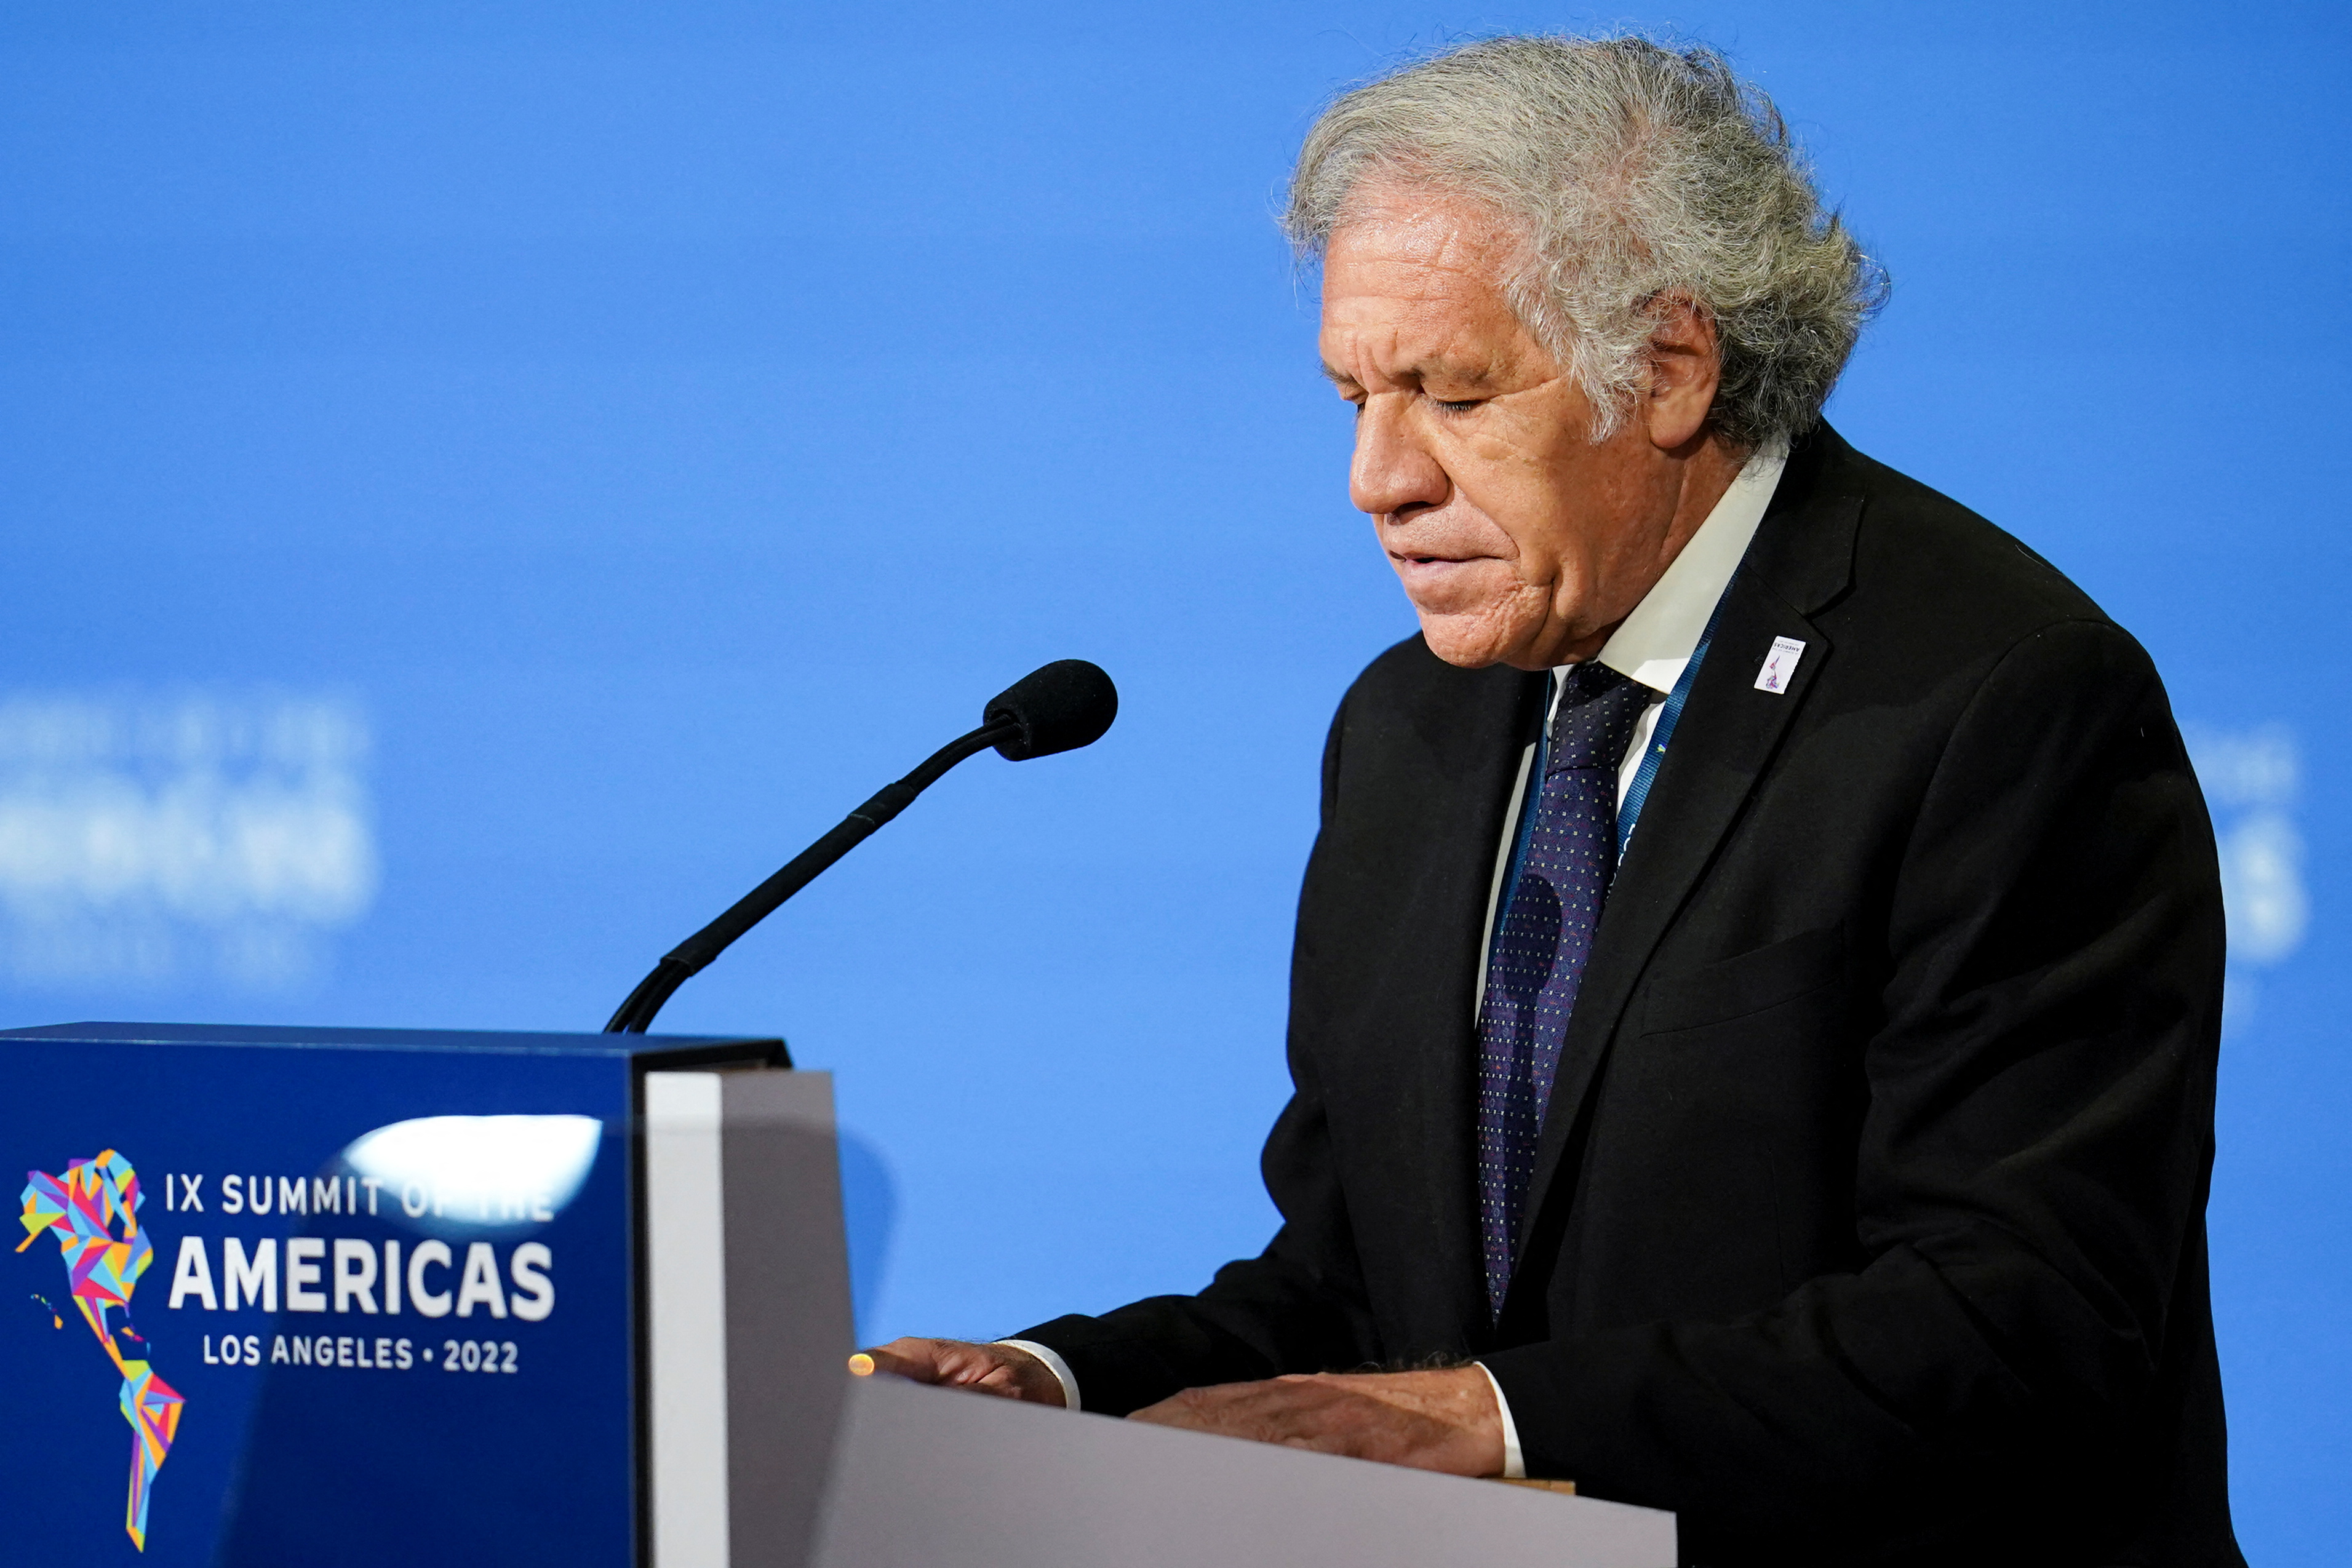 Secretary-General of the Organization of American States Luis Almagro speaks during the Leaders' Second Plenary Session during the Ninth Summit of the Americas in Los Angeles, California, US, June 10, 2022. REUTERS/Lauren Justice